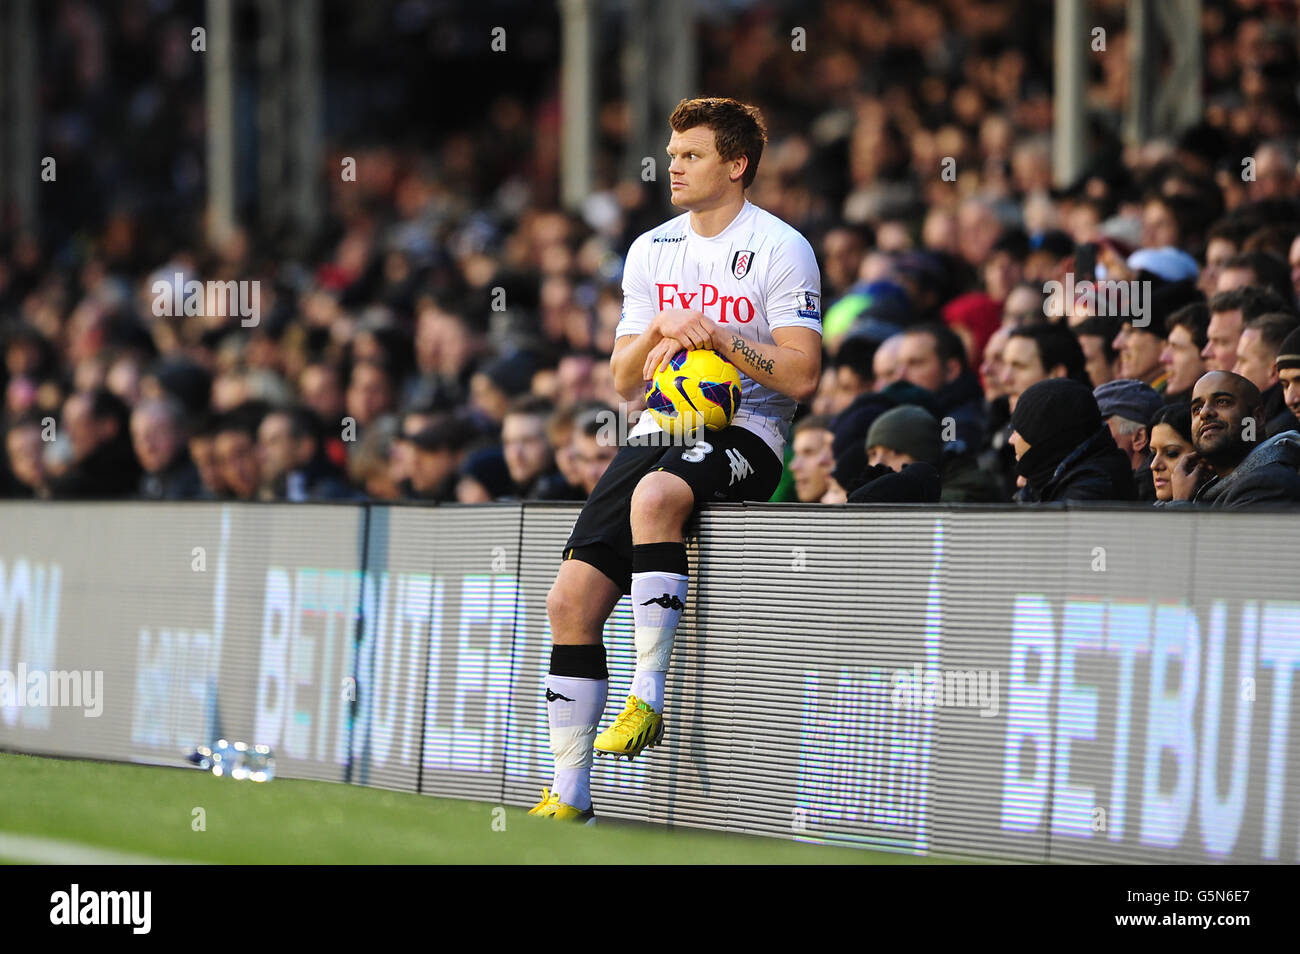 Soccer - Barclays Premier League - Fulham v Tottenham Hotspur - Craven Cottage. Fulham's John Arne Riise waits to take a throw in during a break in play Stock Photo